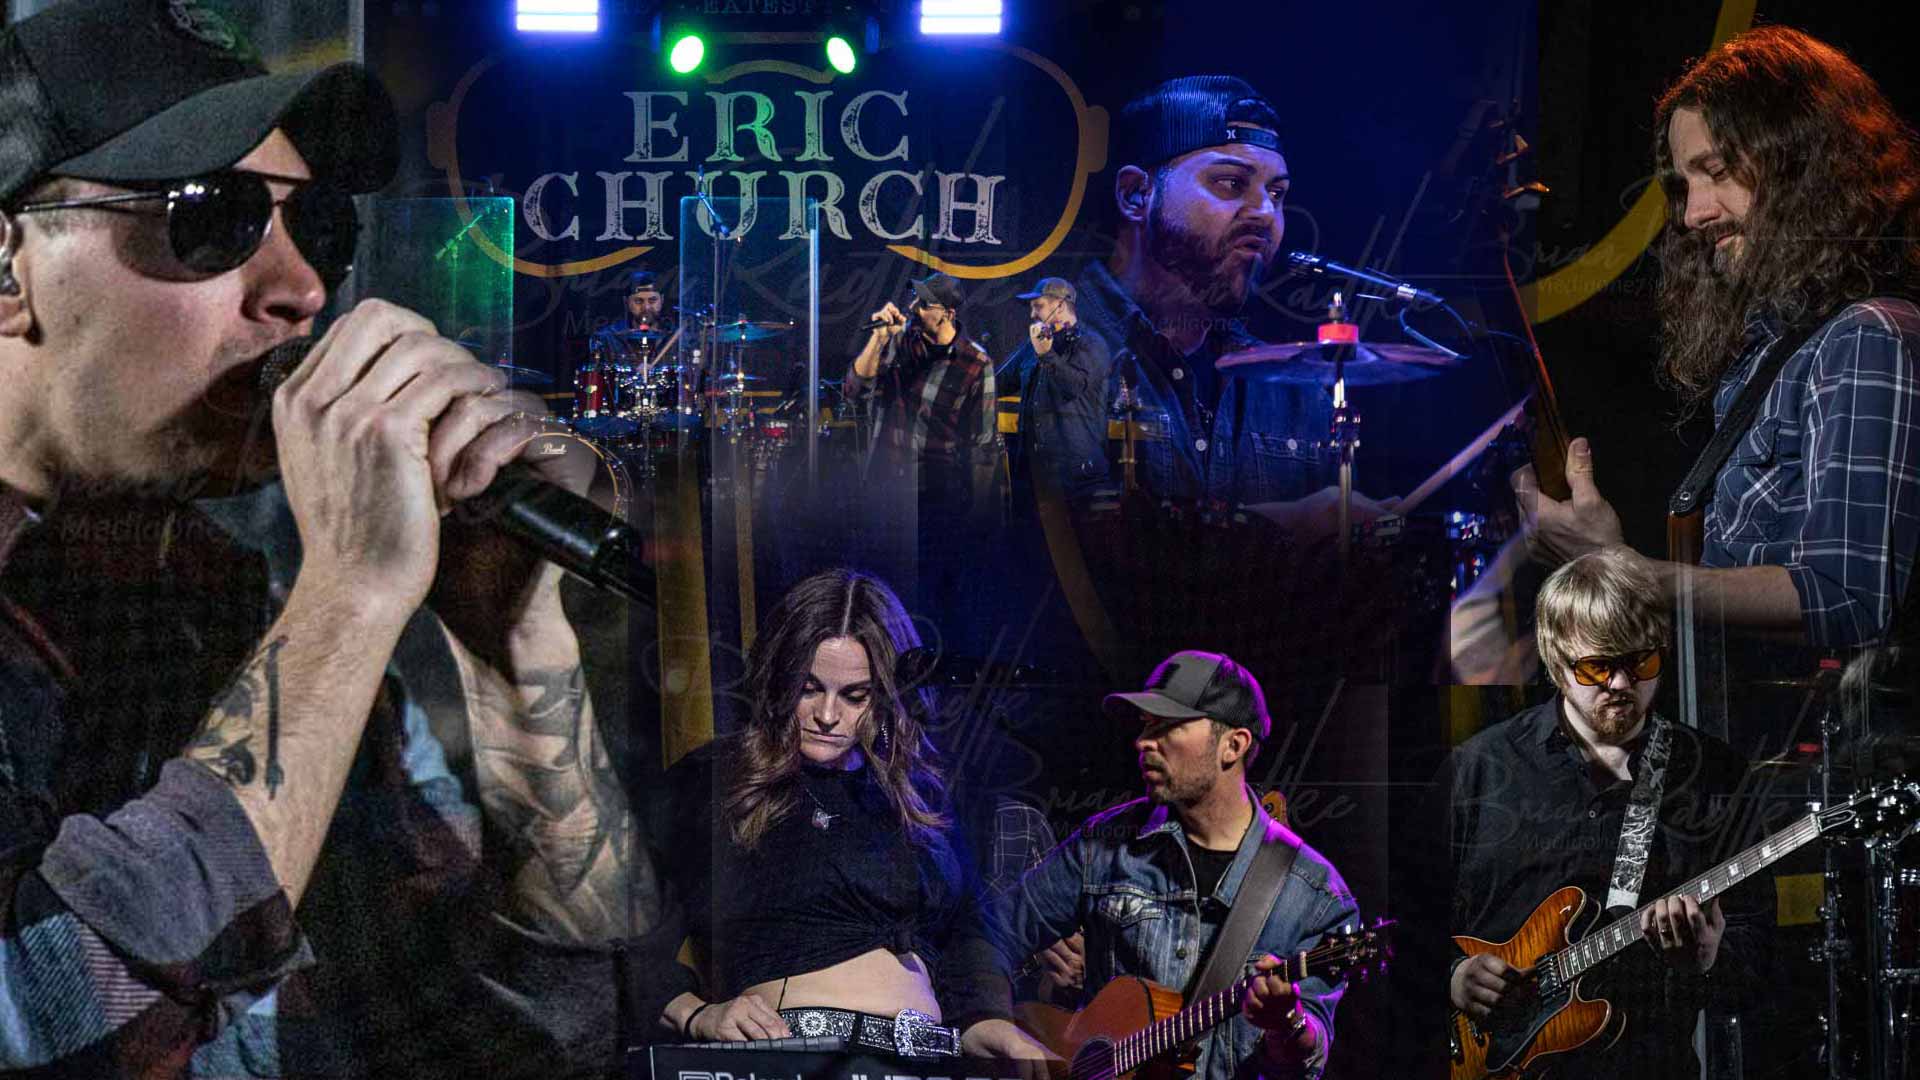 Eric Church Tribute from Icon's entertainment with Dustin Lee and friends.